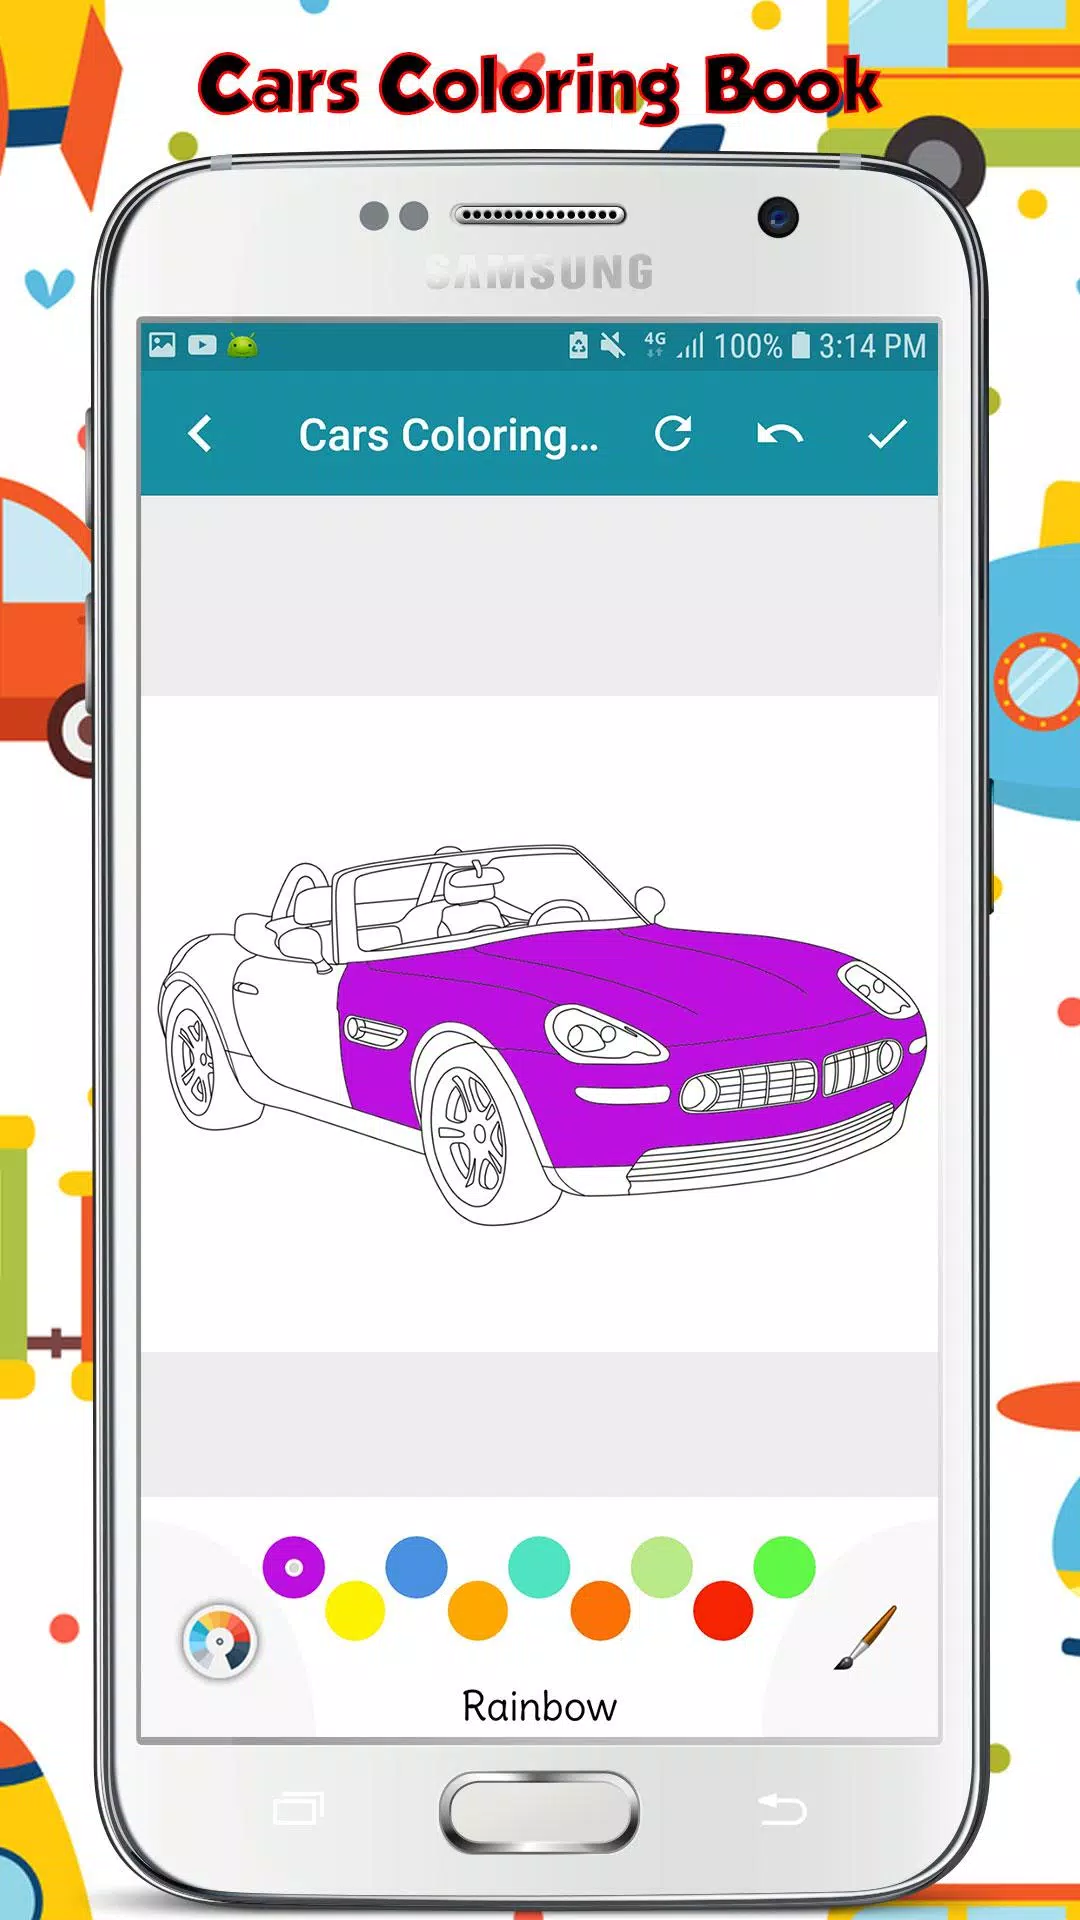 Car Coloring book   Free Coloring Pages for Android   APK Download